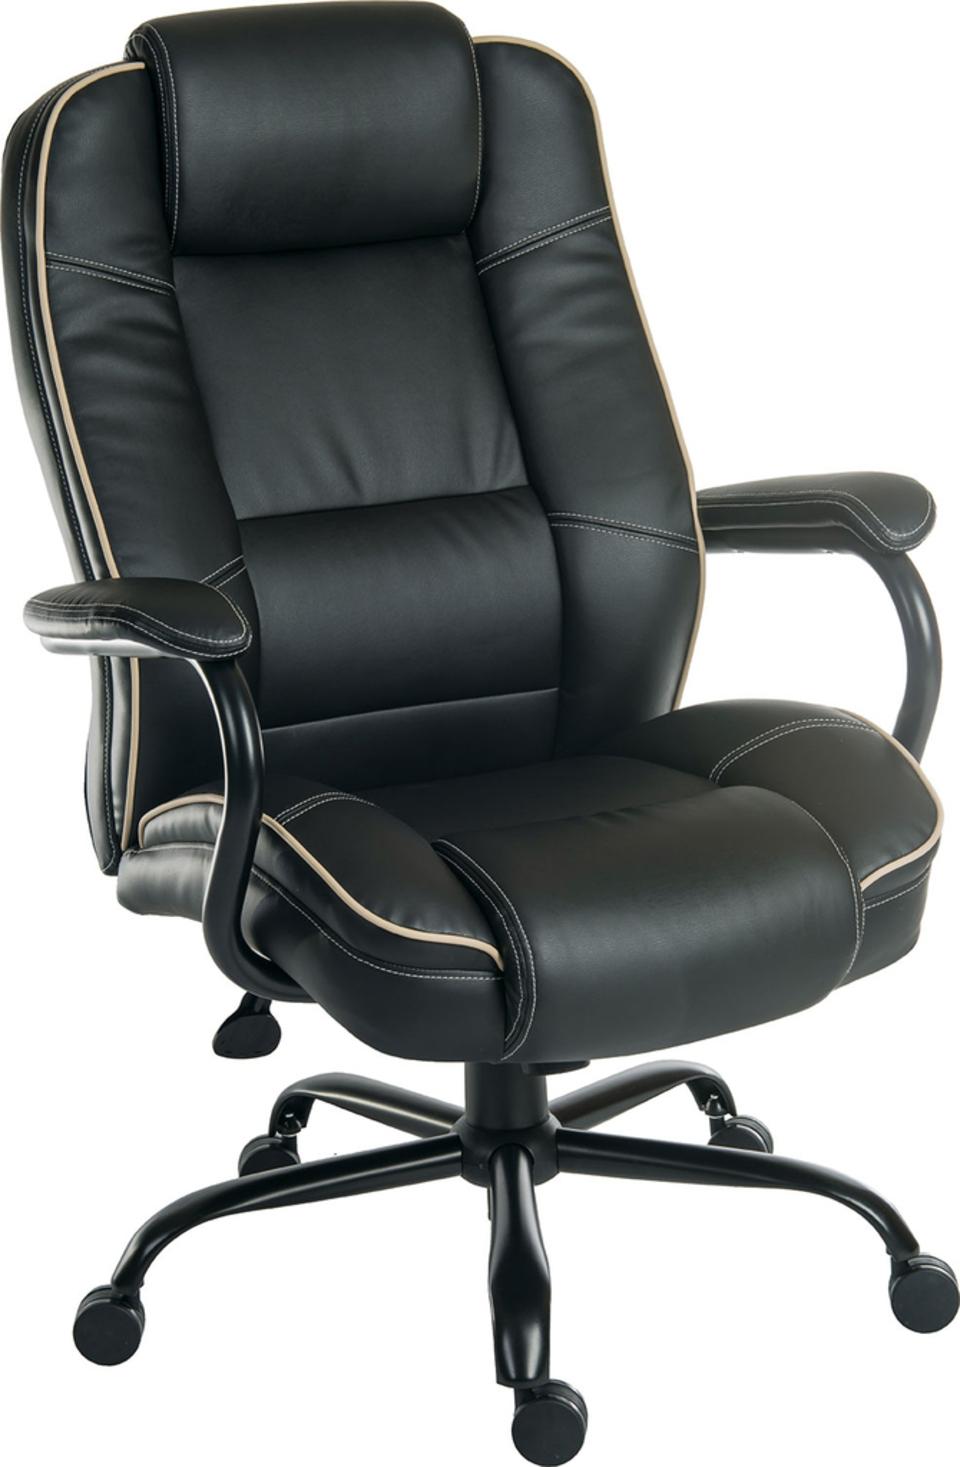 Thor Duo Heavy Duty Leather Executive Chair | SOS Direct Home & Office